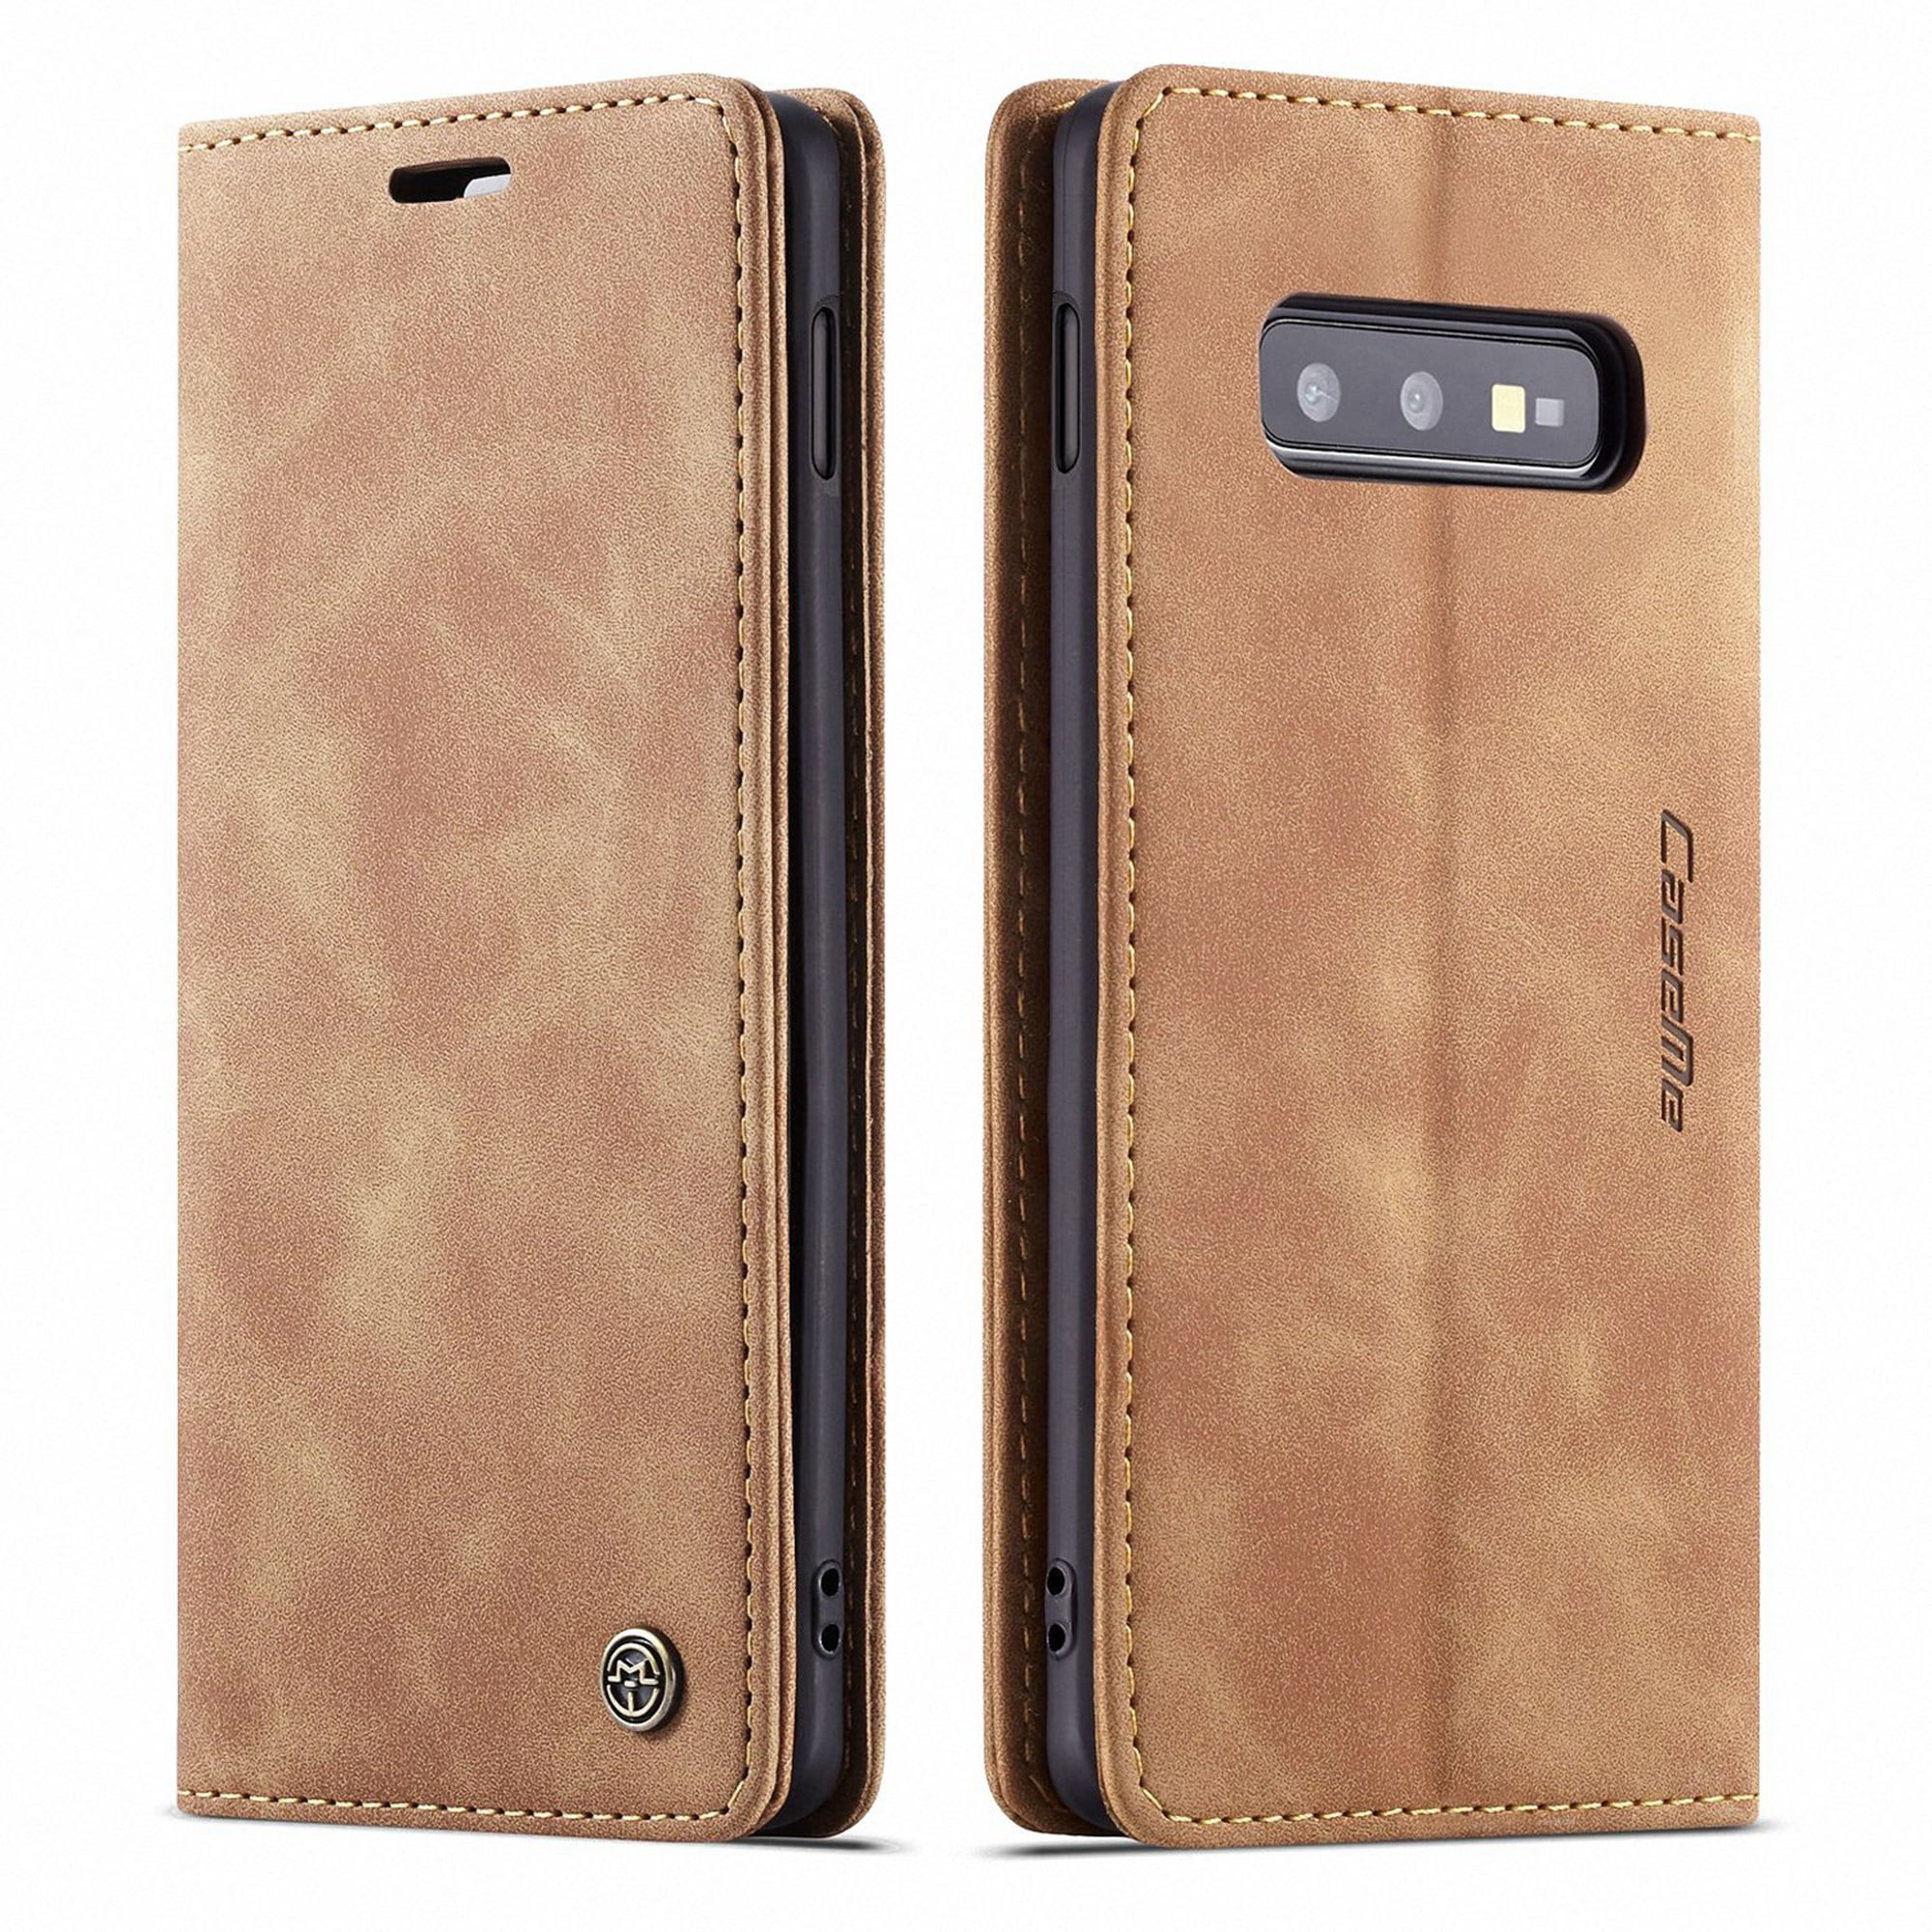 Red Aisenth Samsung Galaxy S10 Flip Case Card Slots 1 pcs Wrist Strap The Tree of Life Embossed PU Leather Wallet Phone Folio Case Magnetic shockproof Protective Cover with Stand function